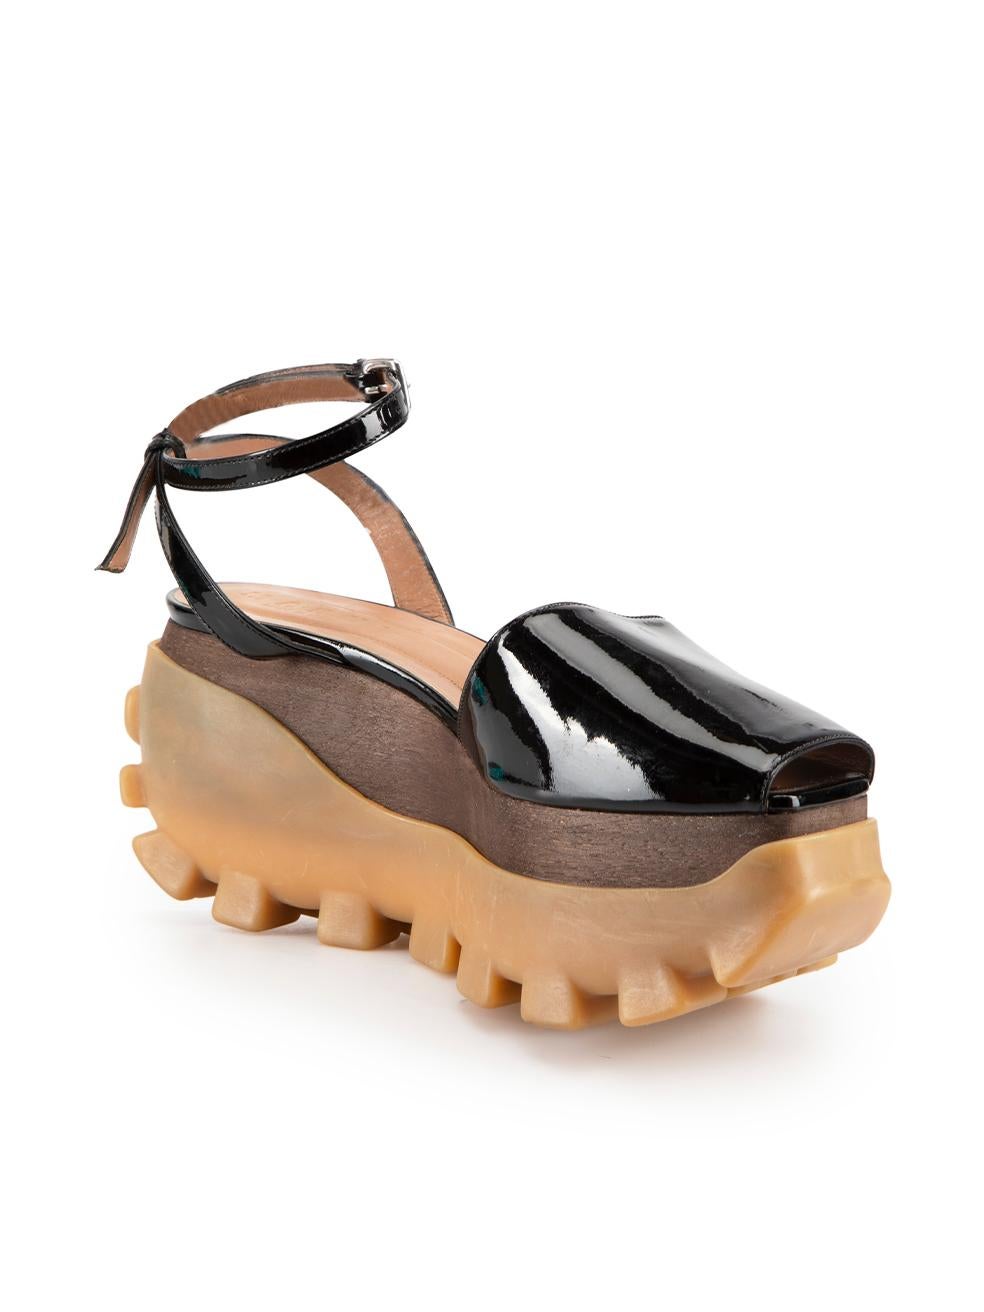 CONDITION is Very good. Minimal wear to shoes is evident. Minimal wear to both shoe rubber platforms with abrasions to the rubber. Both shoe toes also have light scratch marks to the patent leather this used Marni designer resale item.
 